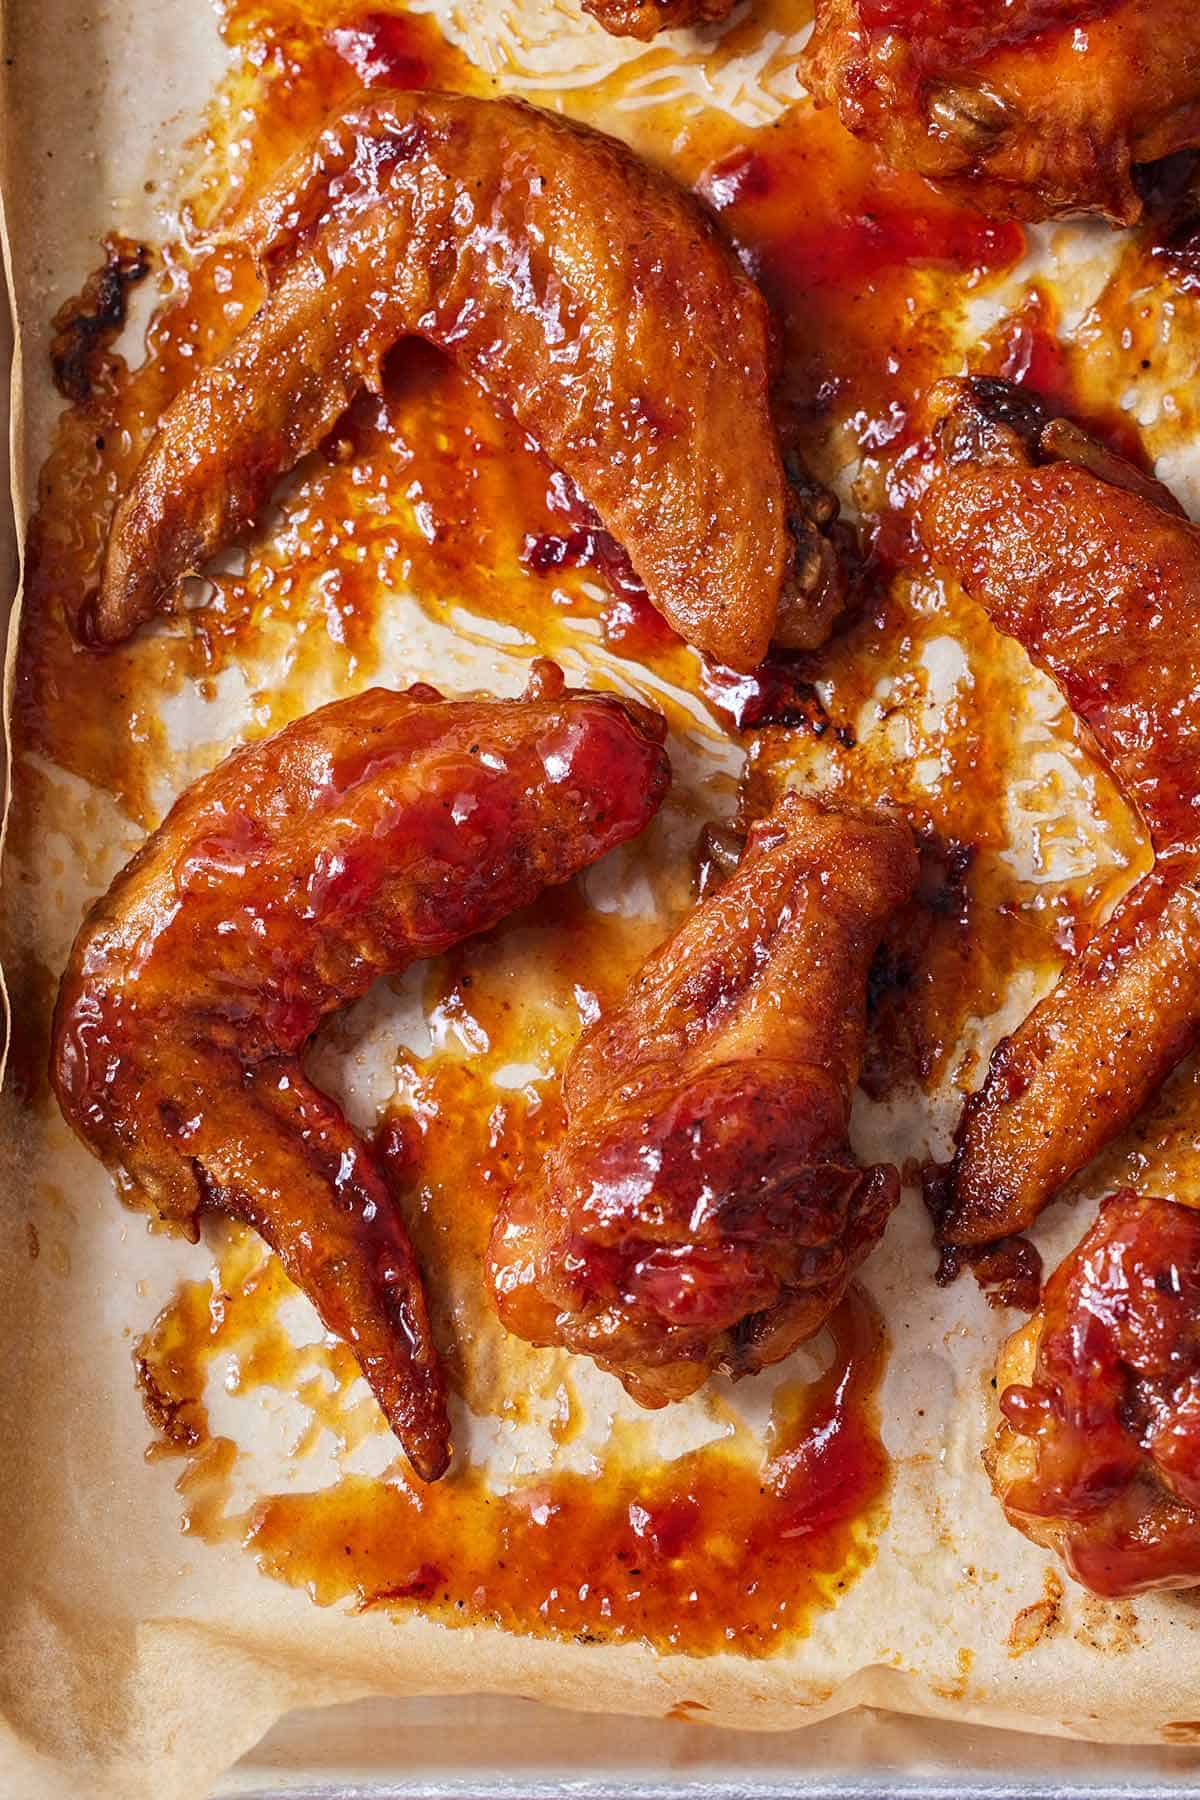 Overhead view of multiple honey BBQ wings on a parchment lined sheet pan.